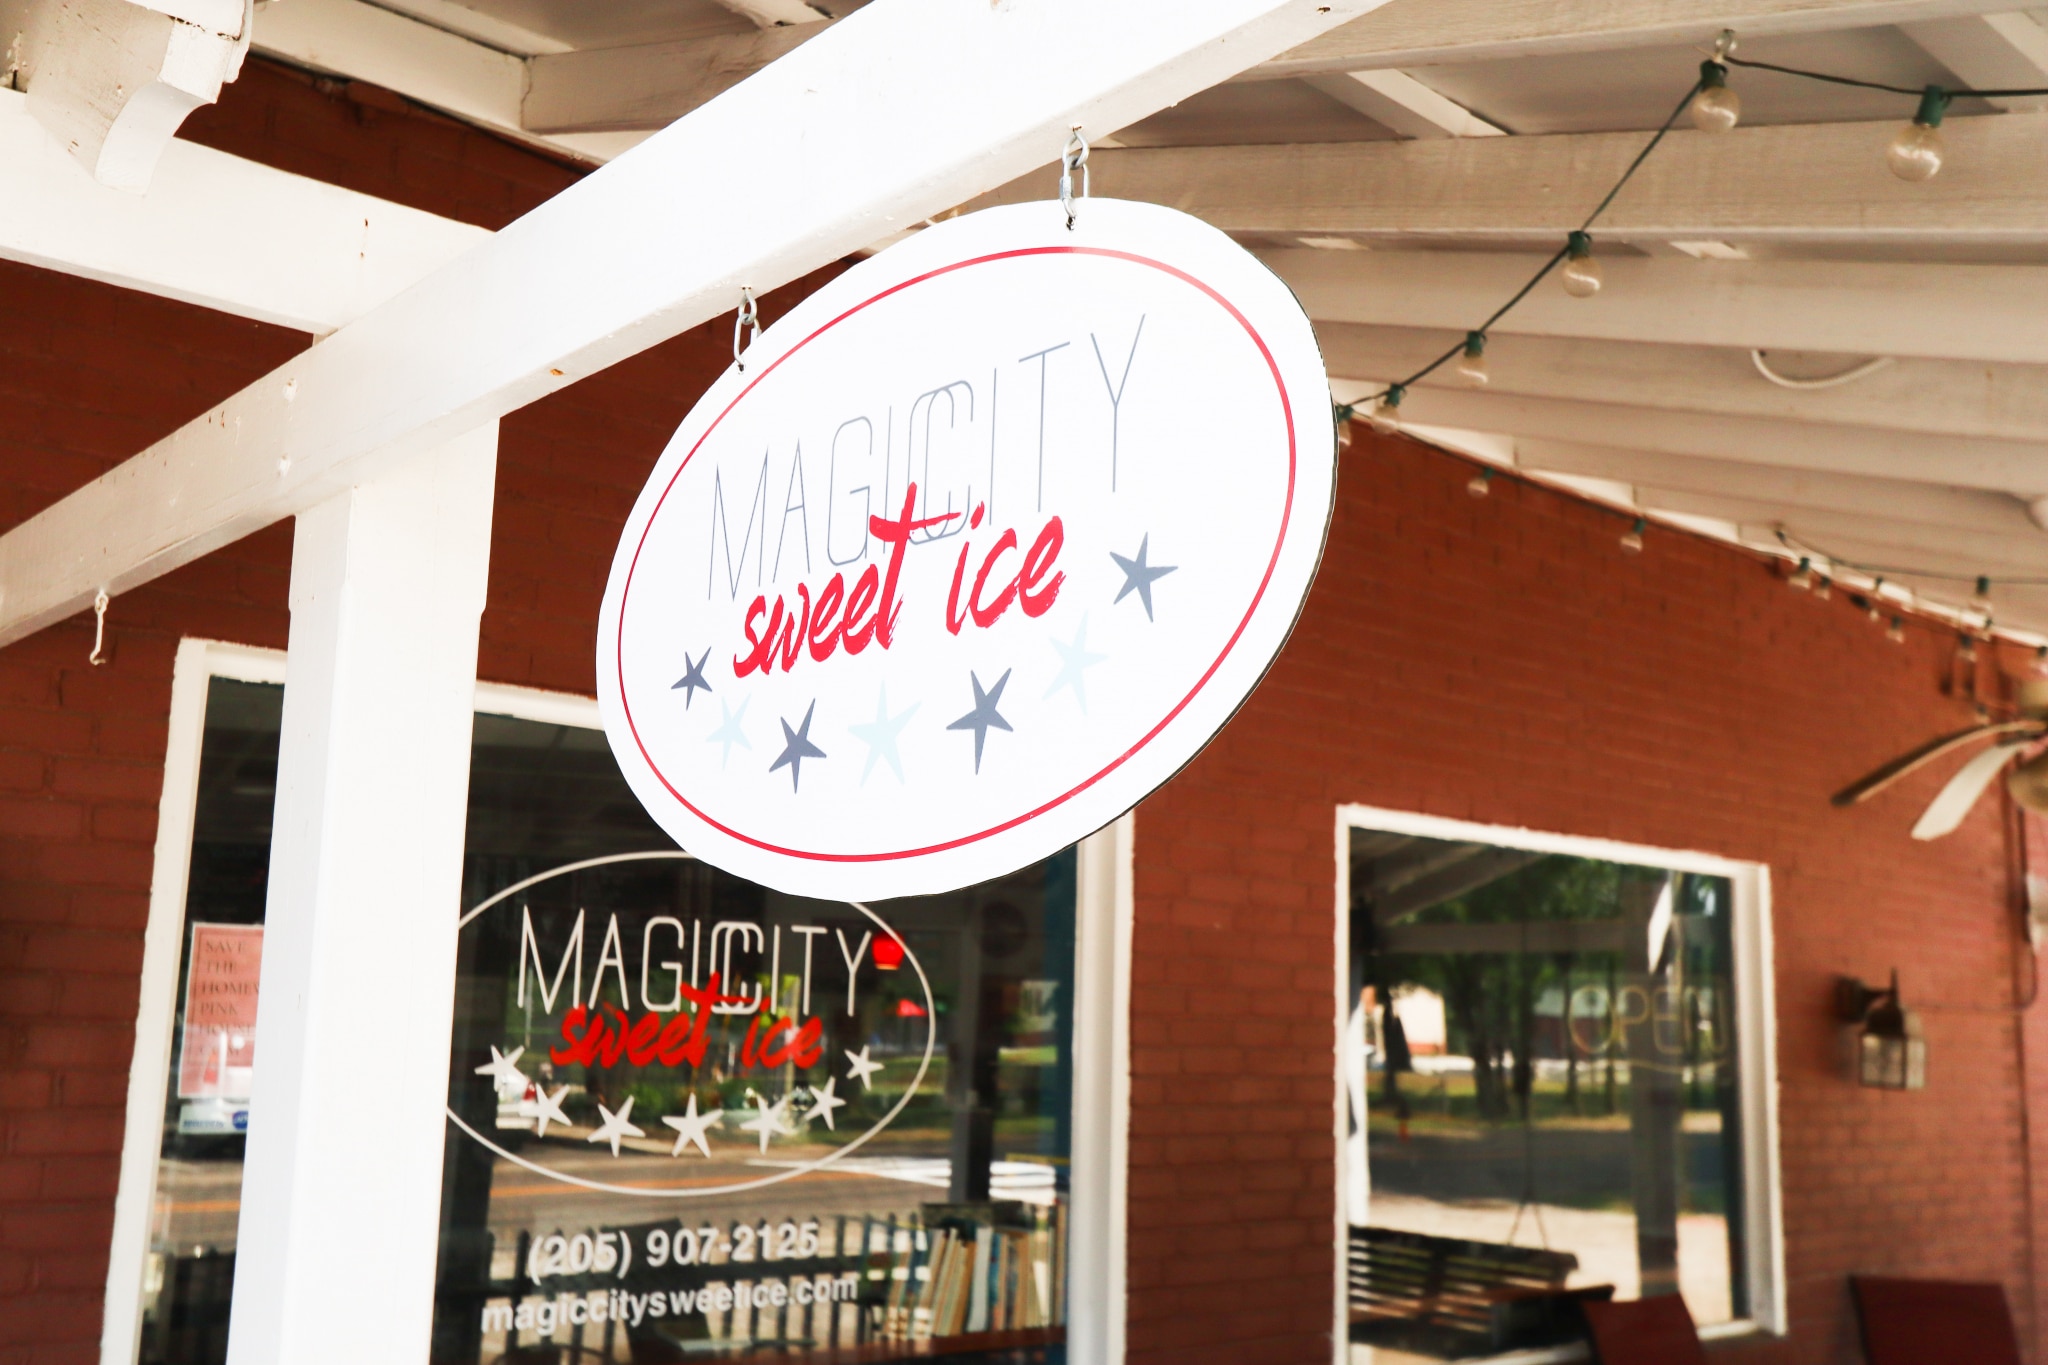 Magic City Ice in West Homewood. (Photo by Christine Hull for Bham Now)